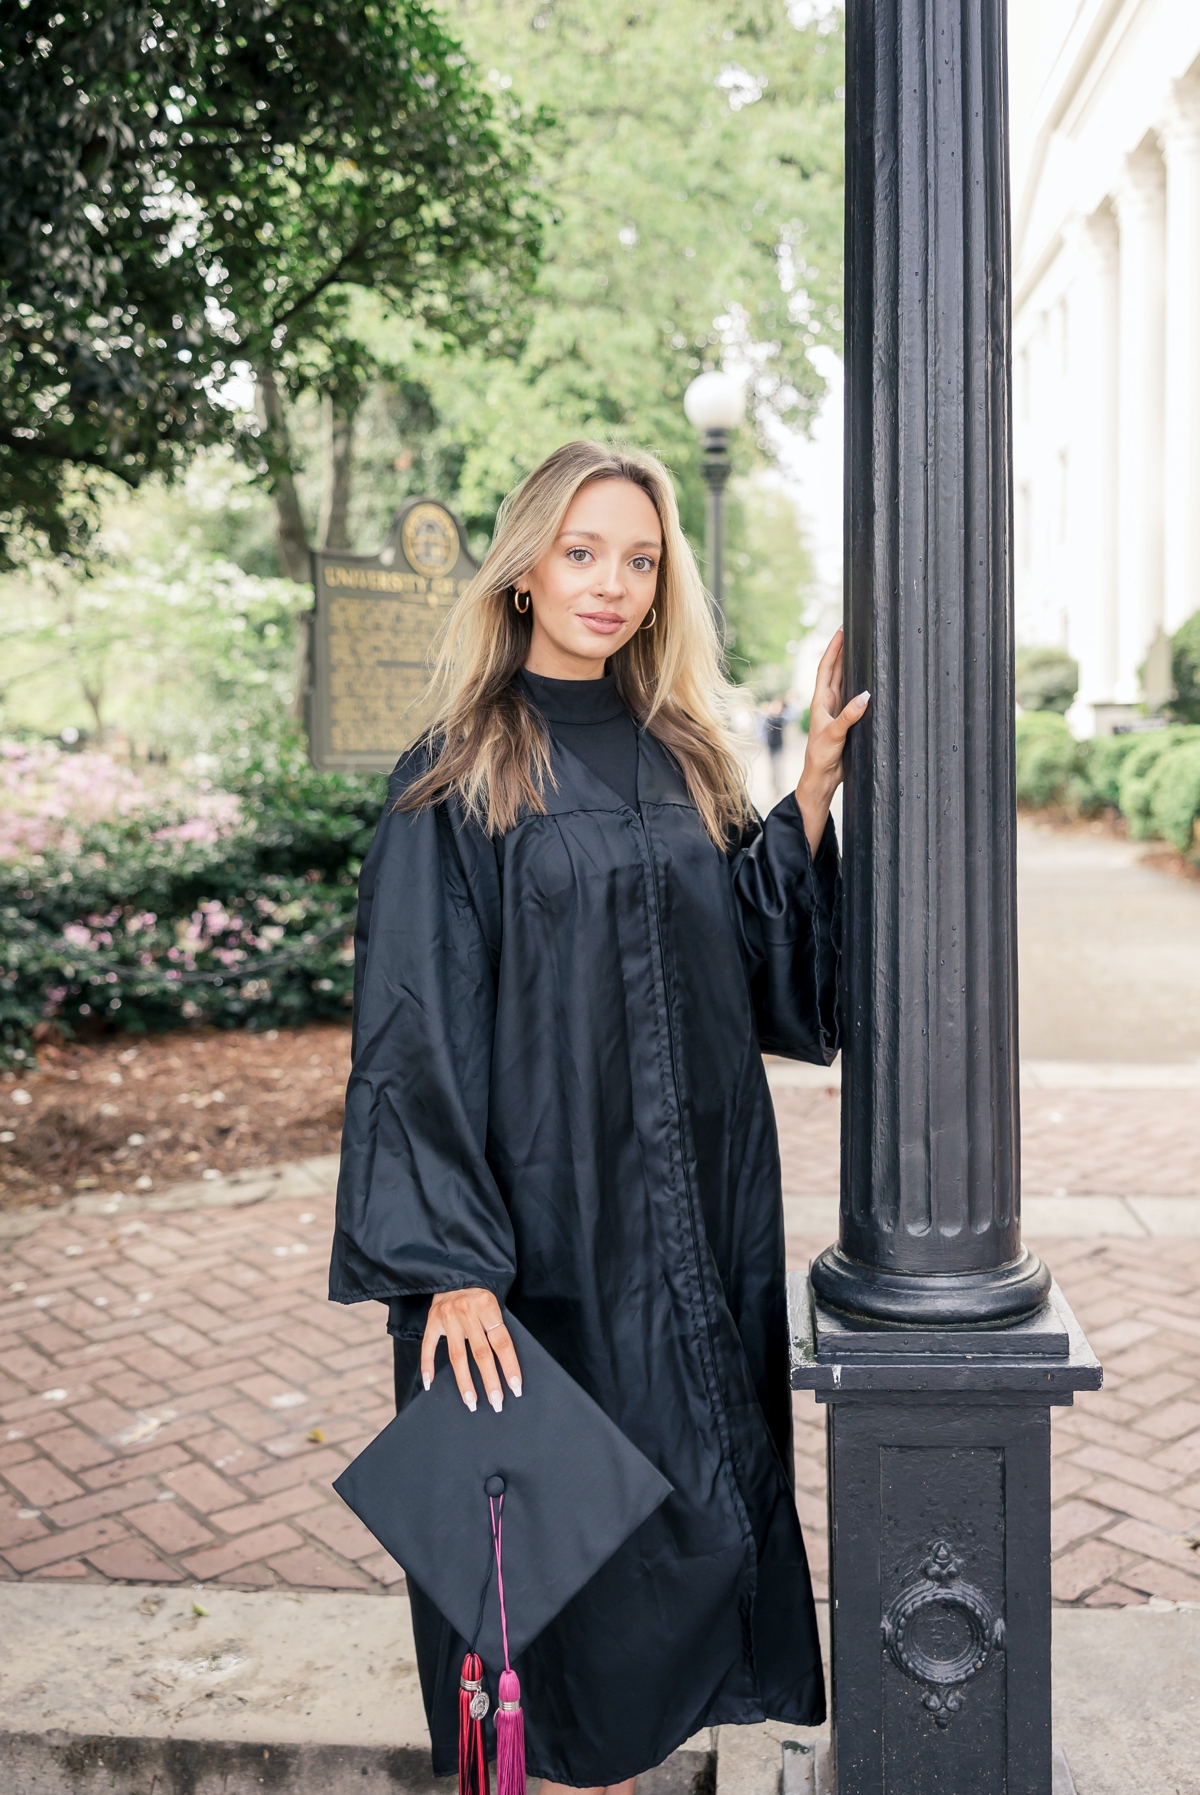 UGA graduate in her black gown holding her graduation cap in one hand and the other hand is placed on a post at the entrance to campus